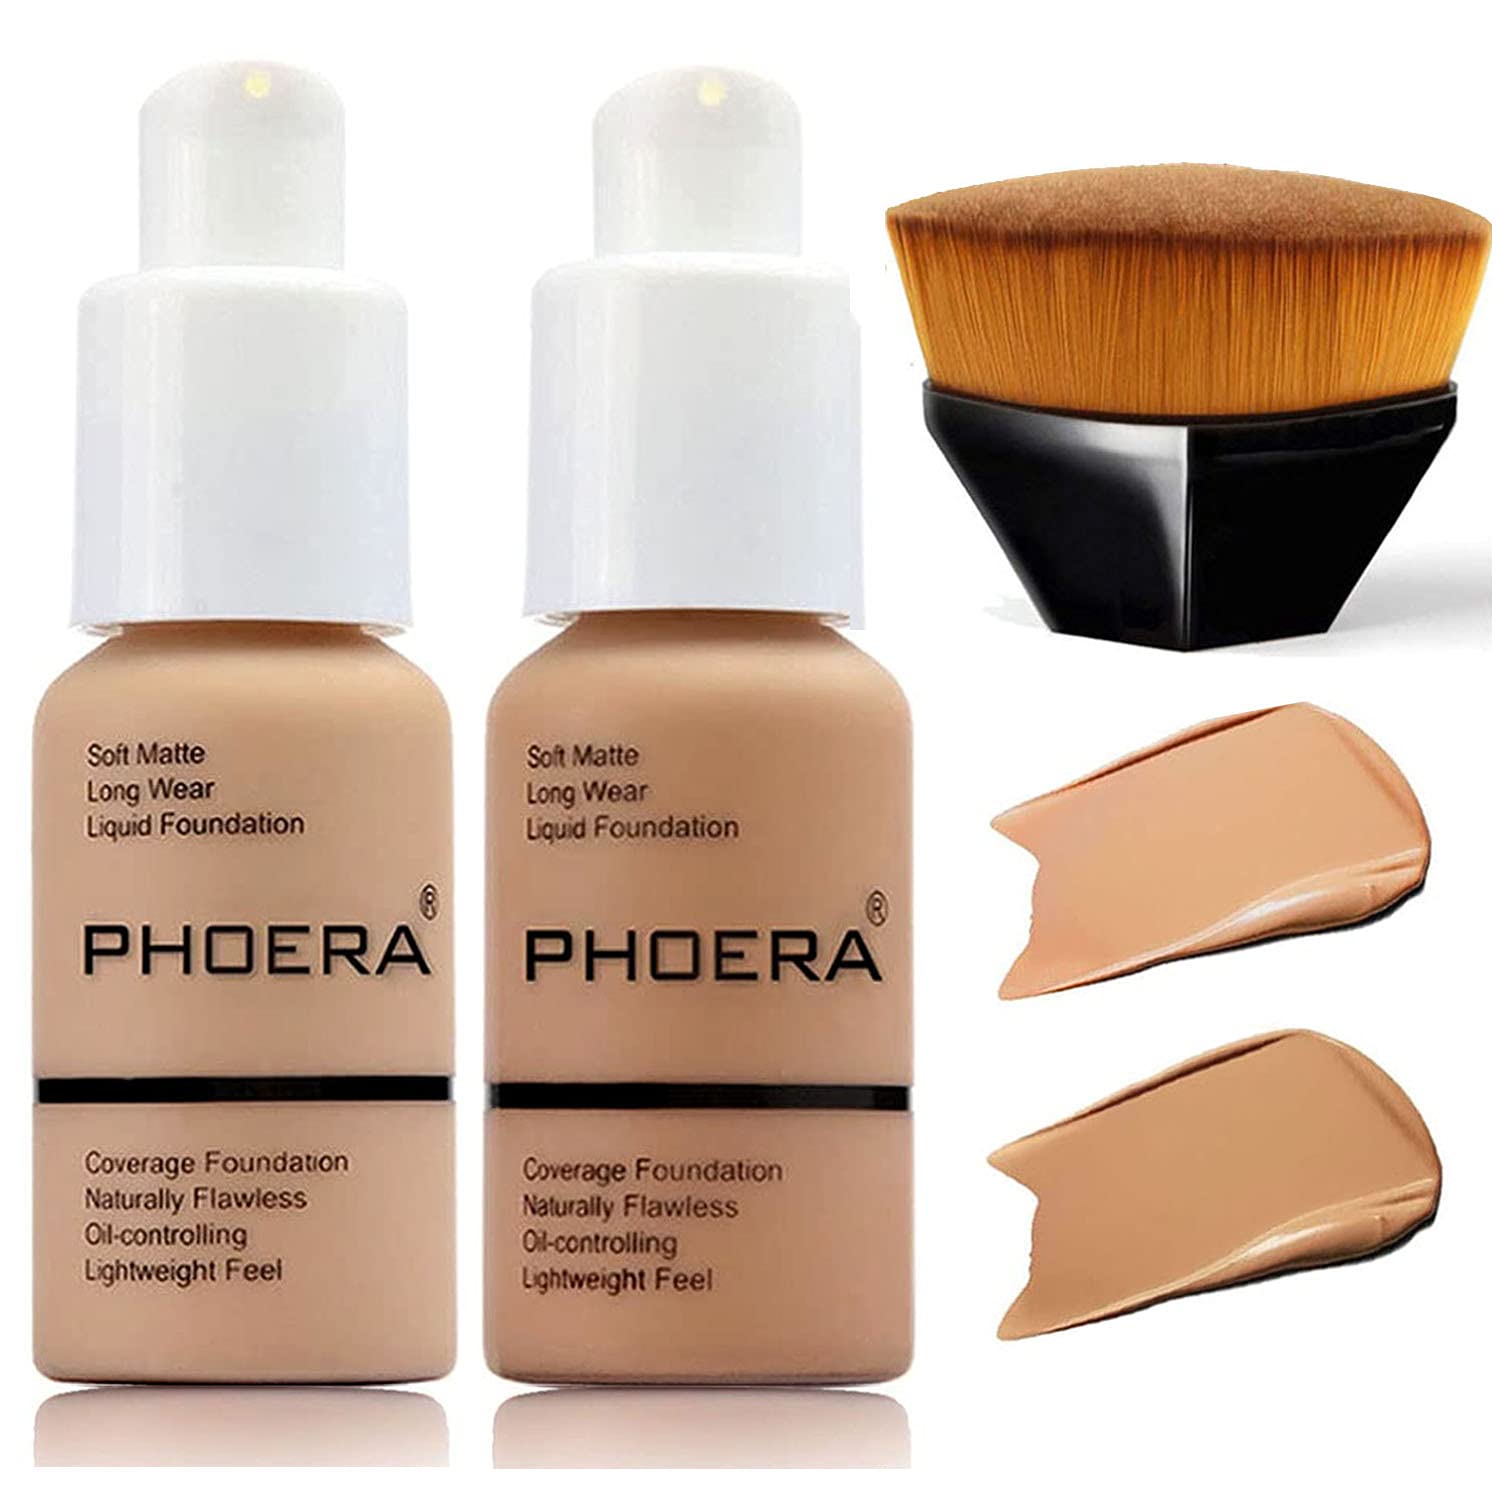 2 Pcs Phoera Foundation Makeup 102 And 104 Liquid Full Coverage 24hr Matte Oil Control 